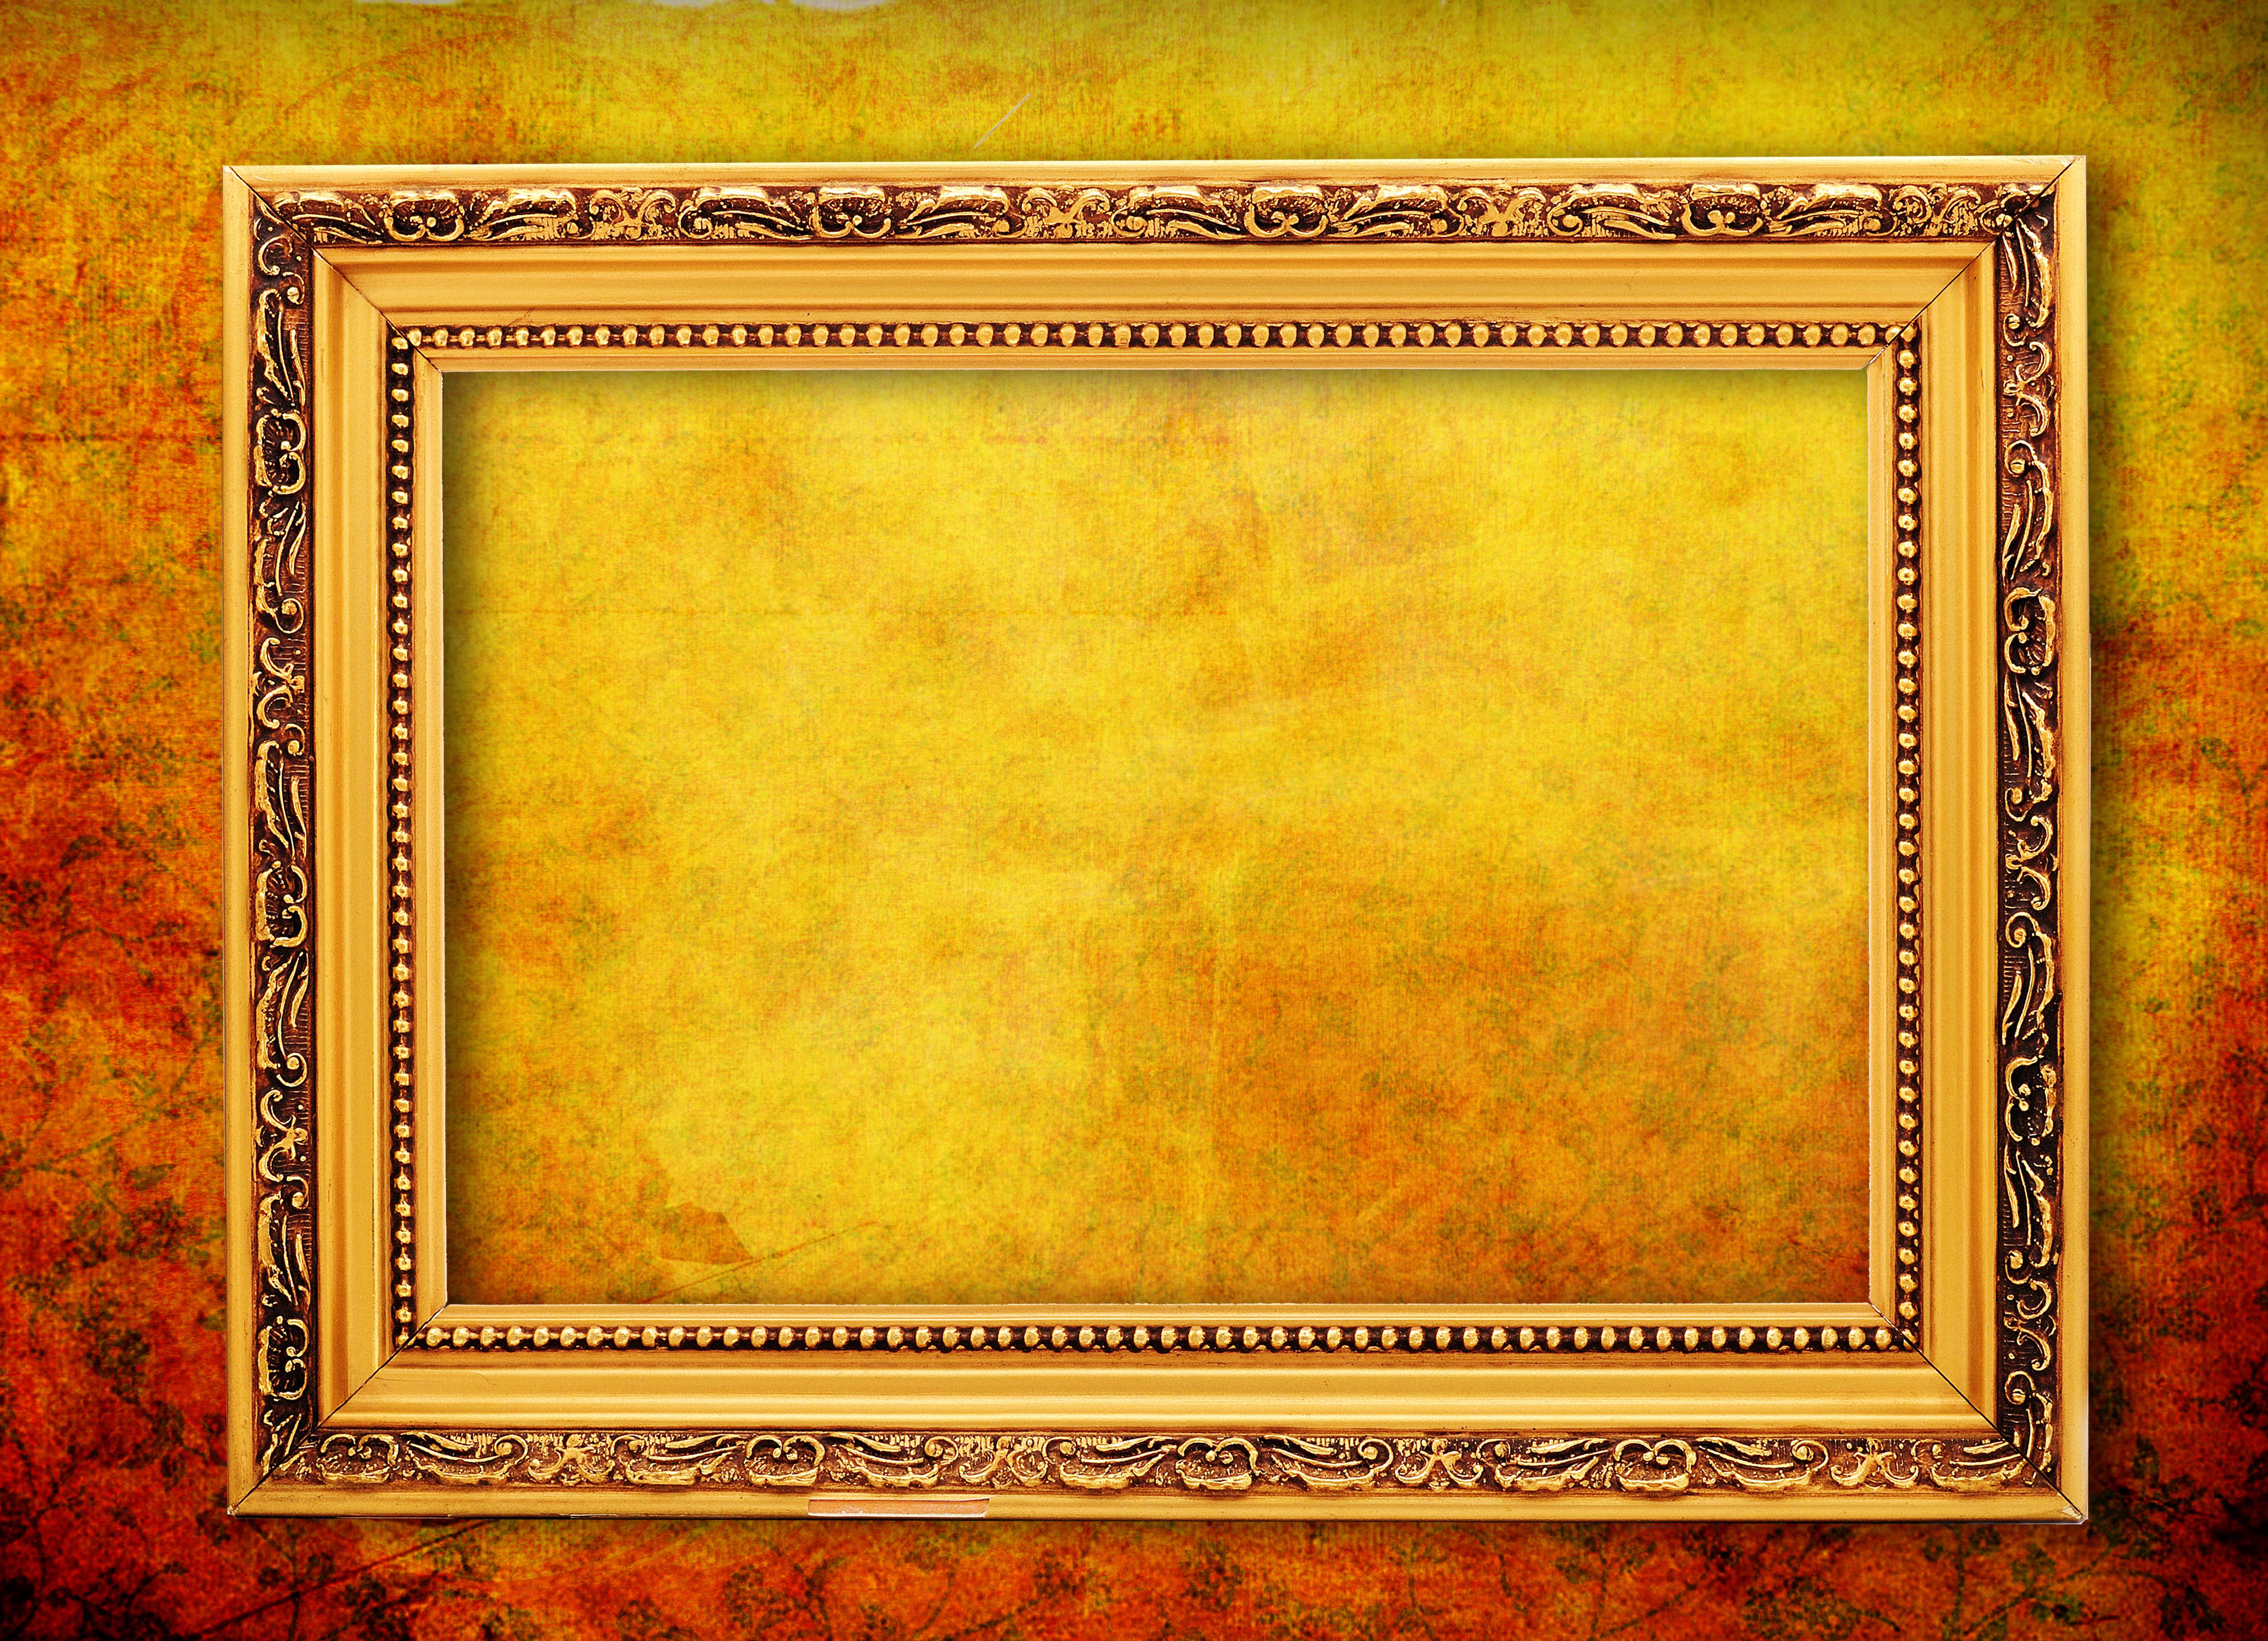 Frame Wallpaper High Quality And Resolution